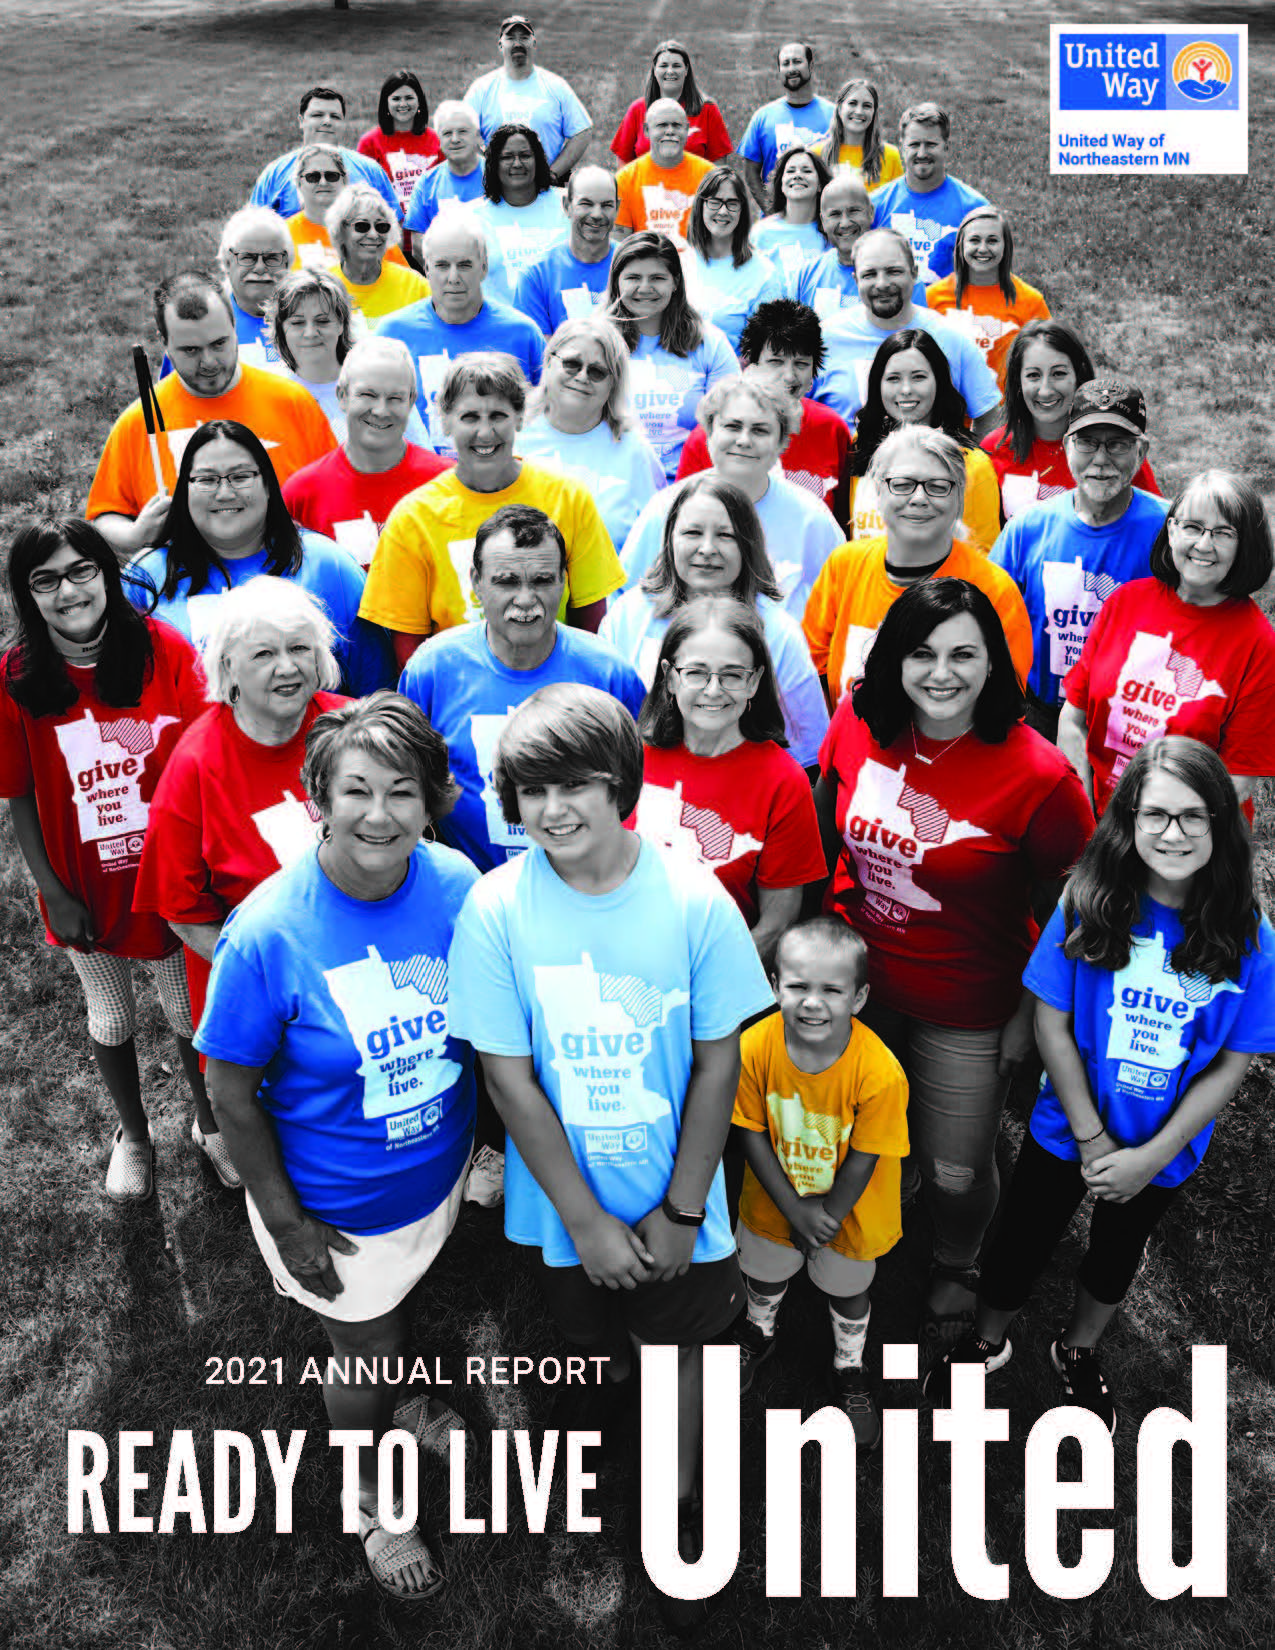 Black and white image of people wearing Give Where You Live t-shirts. Their shirts are in color: red, blue, yellow, orange. The United Way of NE MN logo is top right, and at the bottom are the words "READY TO LIVE UNITED"